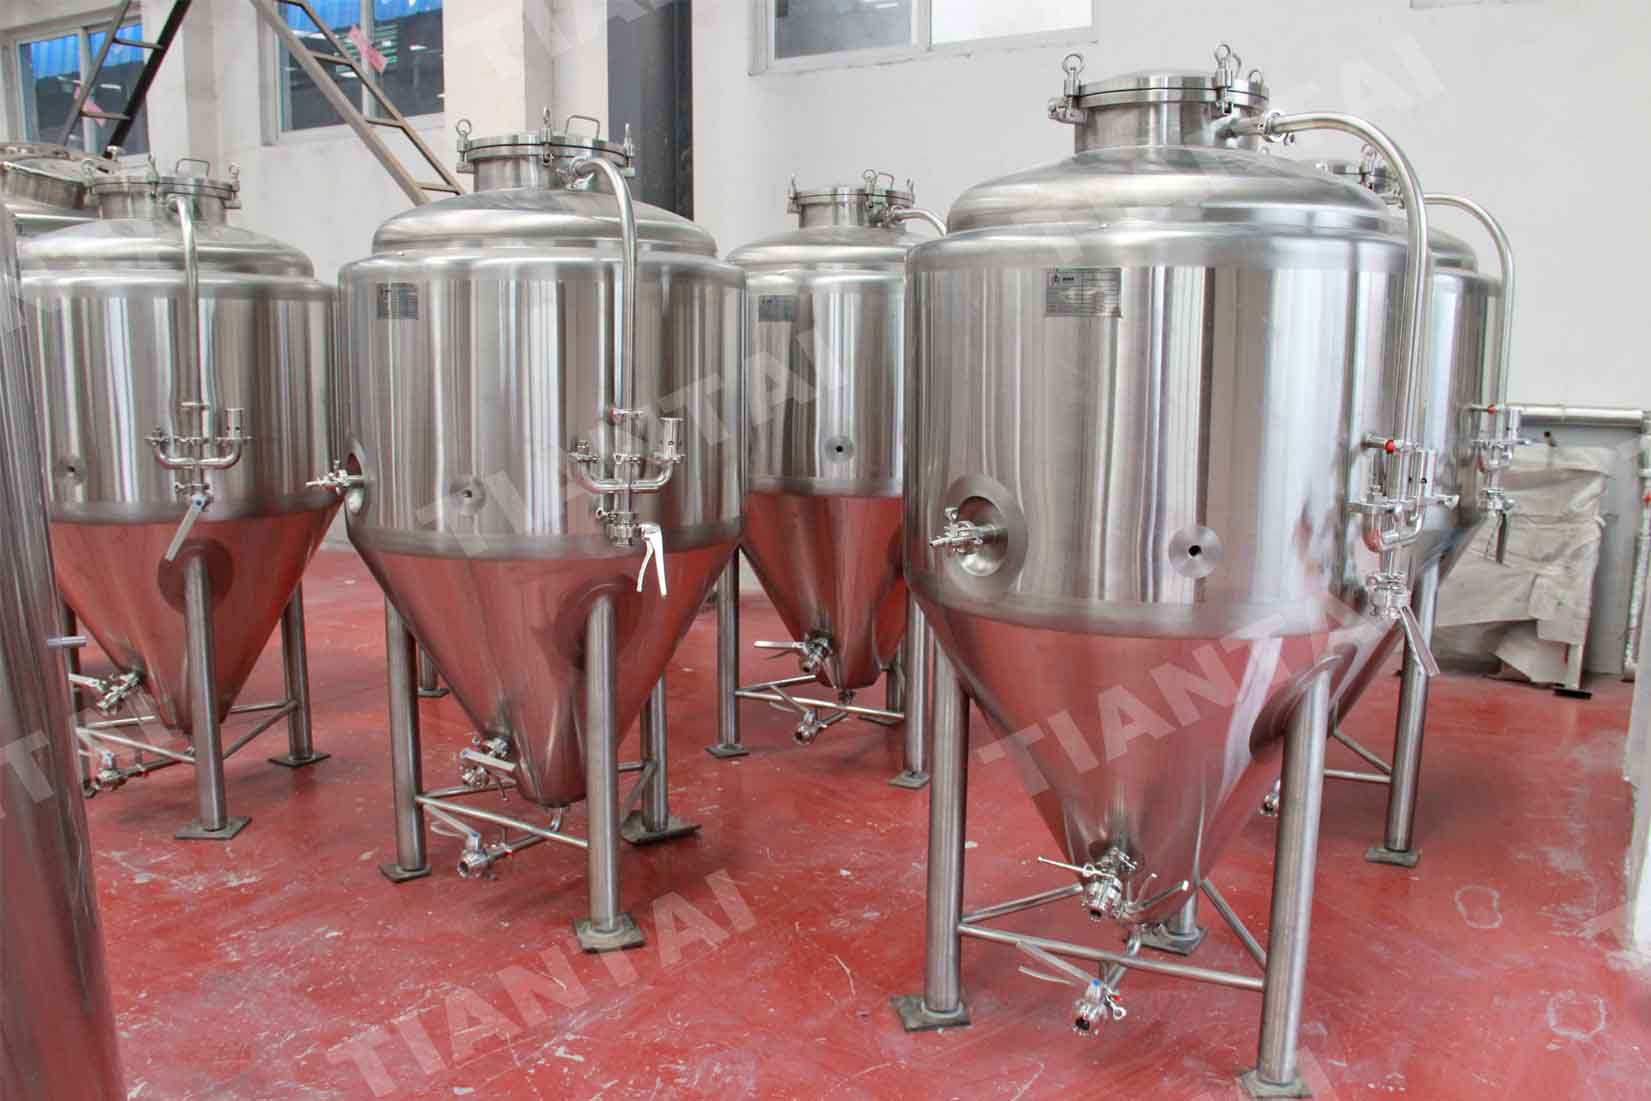 The 500L double wall jacketed beer fermenters delivered to Australia